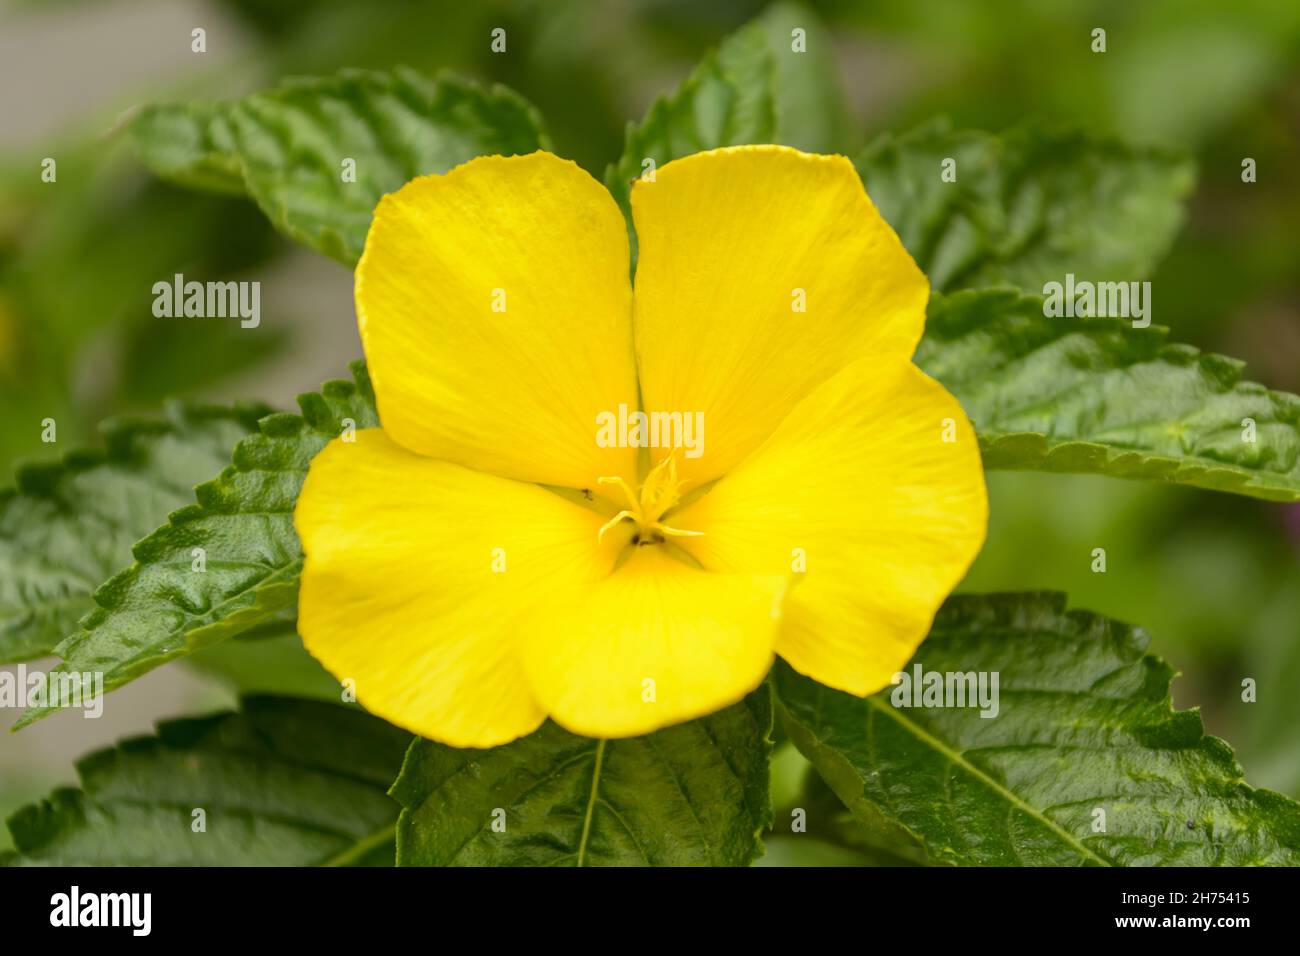 Closeup of the blossomed yellow Damiana flower Stock Photo